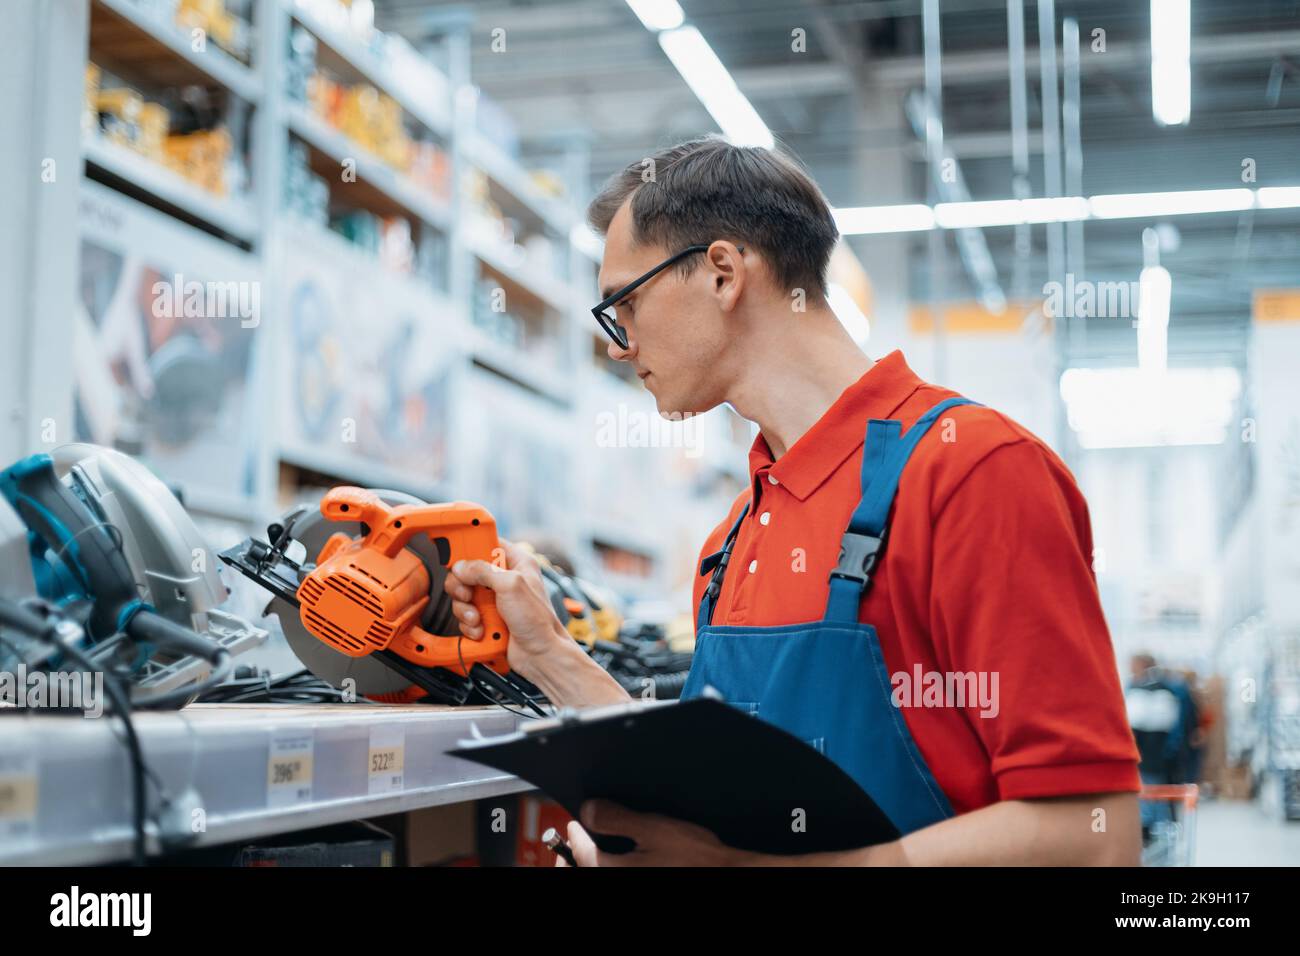 supervisor of the hardware store checking the markings on the power tools. Stock Photo